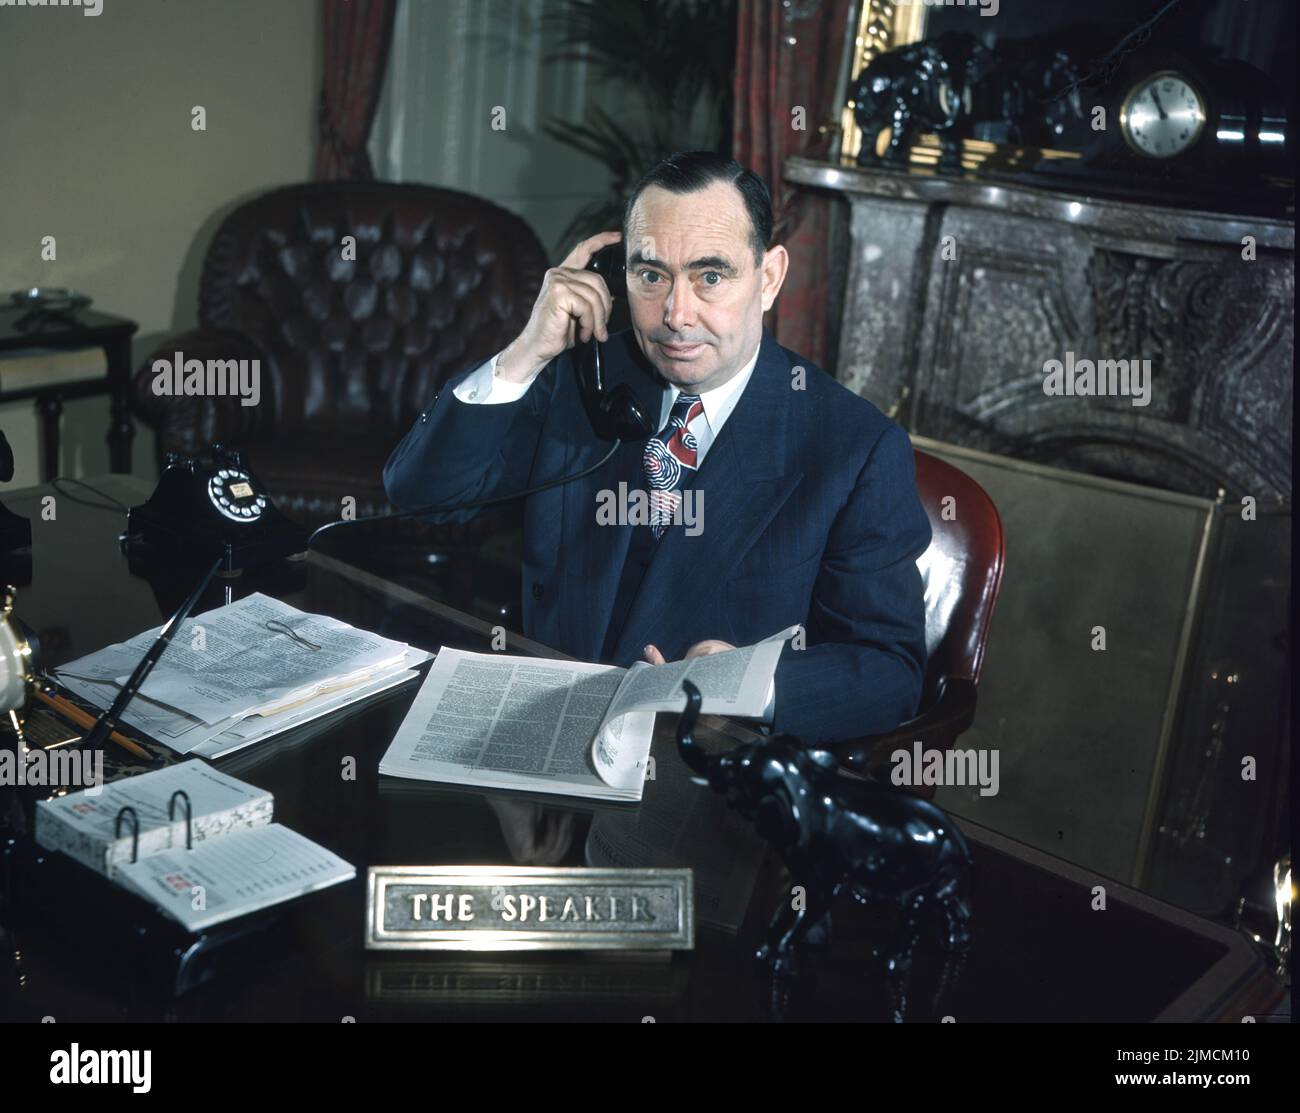 Circa 1955, Washington, District of Columbia, USA: Rep. JOSEPH WILLIAM MARTIN, House Speaker at his desk in Washington DC in 1955. JOSEPH WILLIAM MARTIN Jr. (November 3, 1884 C March 6, 1968) was an American Republican politician who served as the 44th speaker of the United States House of Representatives from 1947 to 1949 and 1953 to 1955. He represented a House district centered on his hometown of North Attleborough, Massachusetts from 1925 to 1967 and was the leader of House Republicans from 1939 until 1959. (Credit Image: © Keystone USA/ZUMA Press Wire) Stock Photo